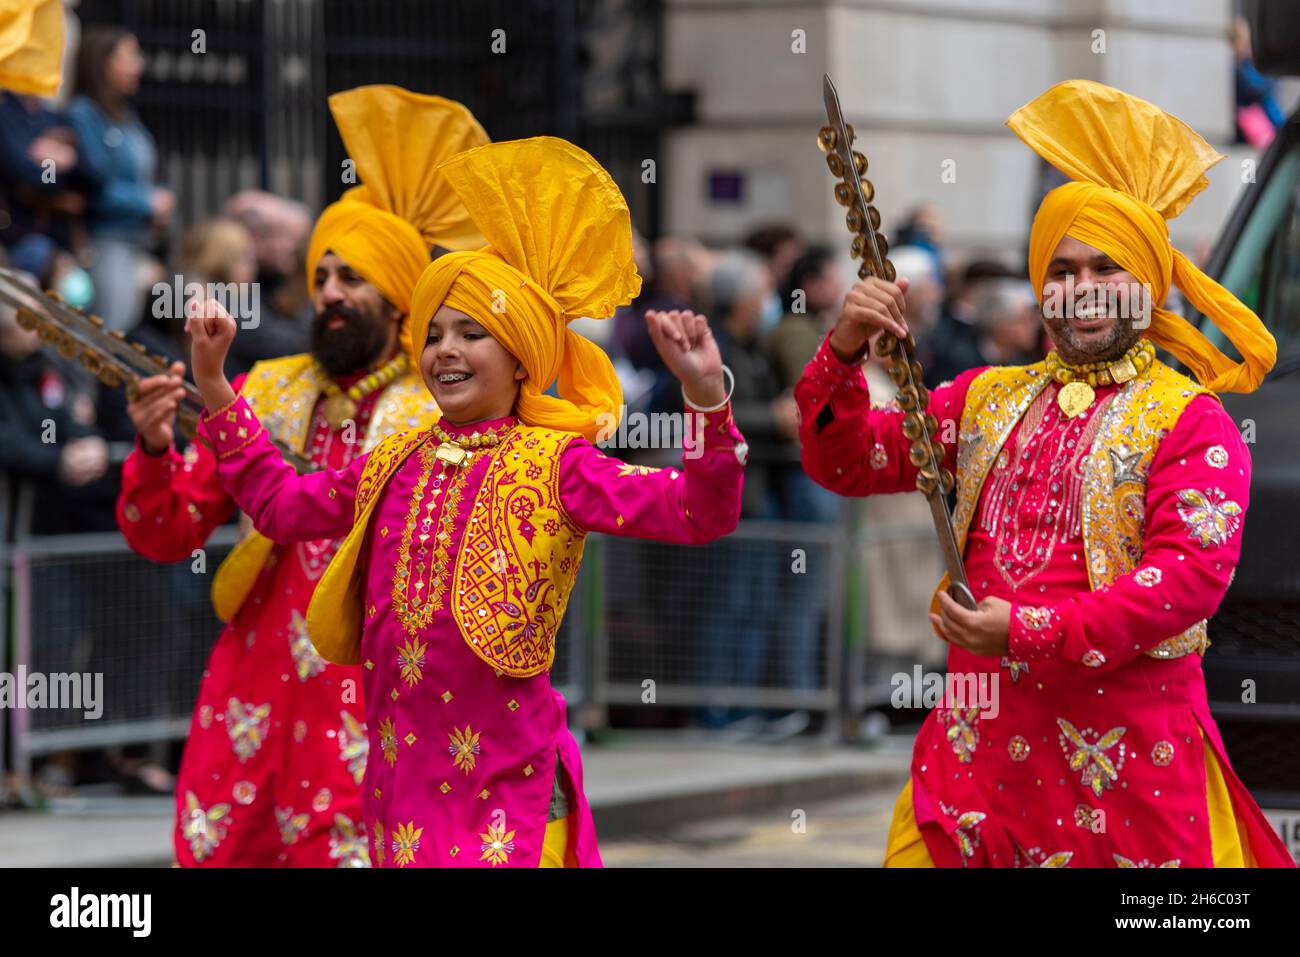 Punjab National Bank (International) Limited (PNBIL) al Lord Mayor's Show, sfilata, processione passando lungo Poultry, vicino Mansion House, Londra Foto Stock